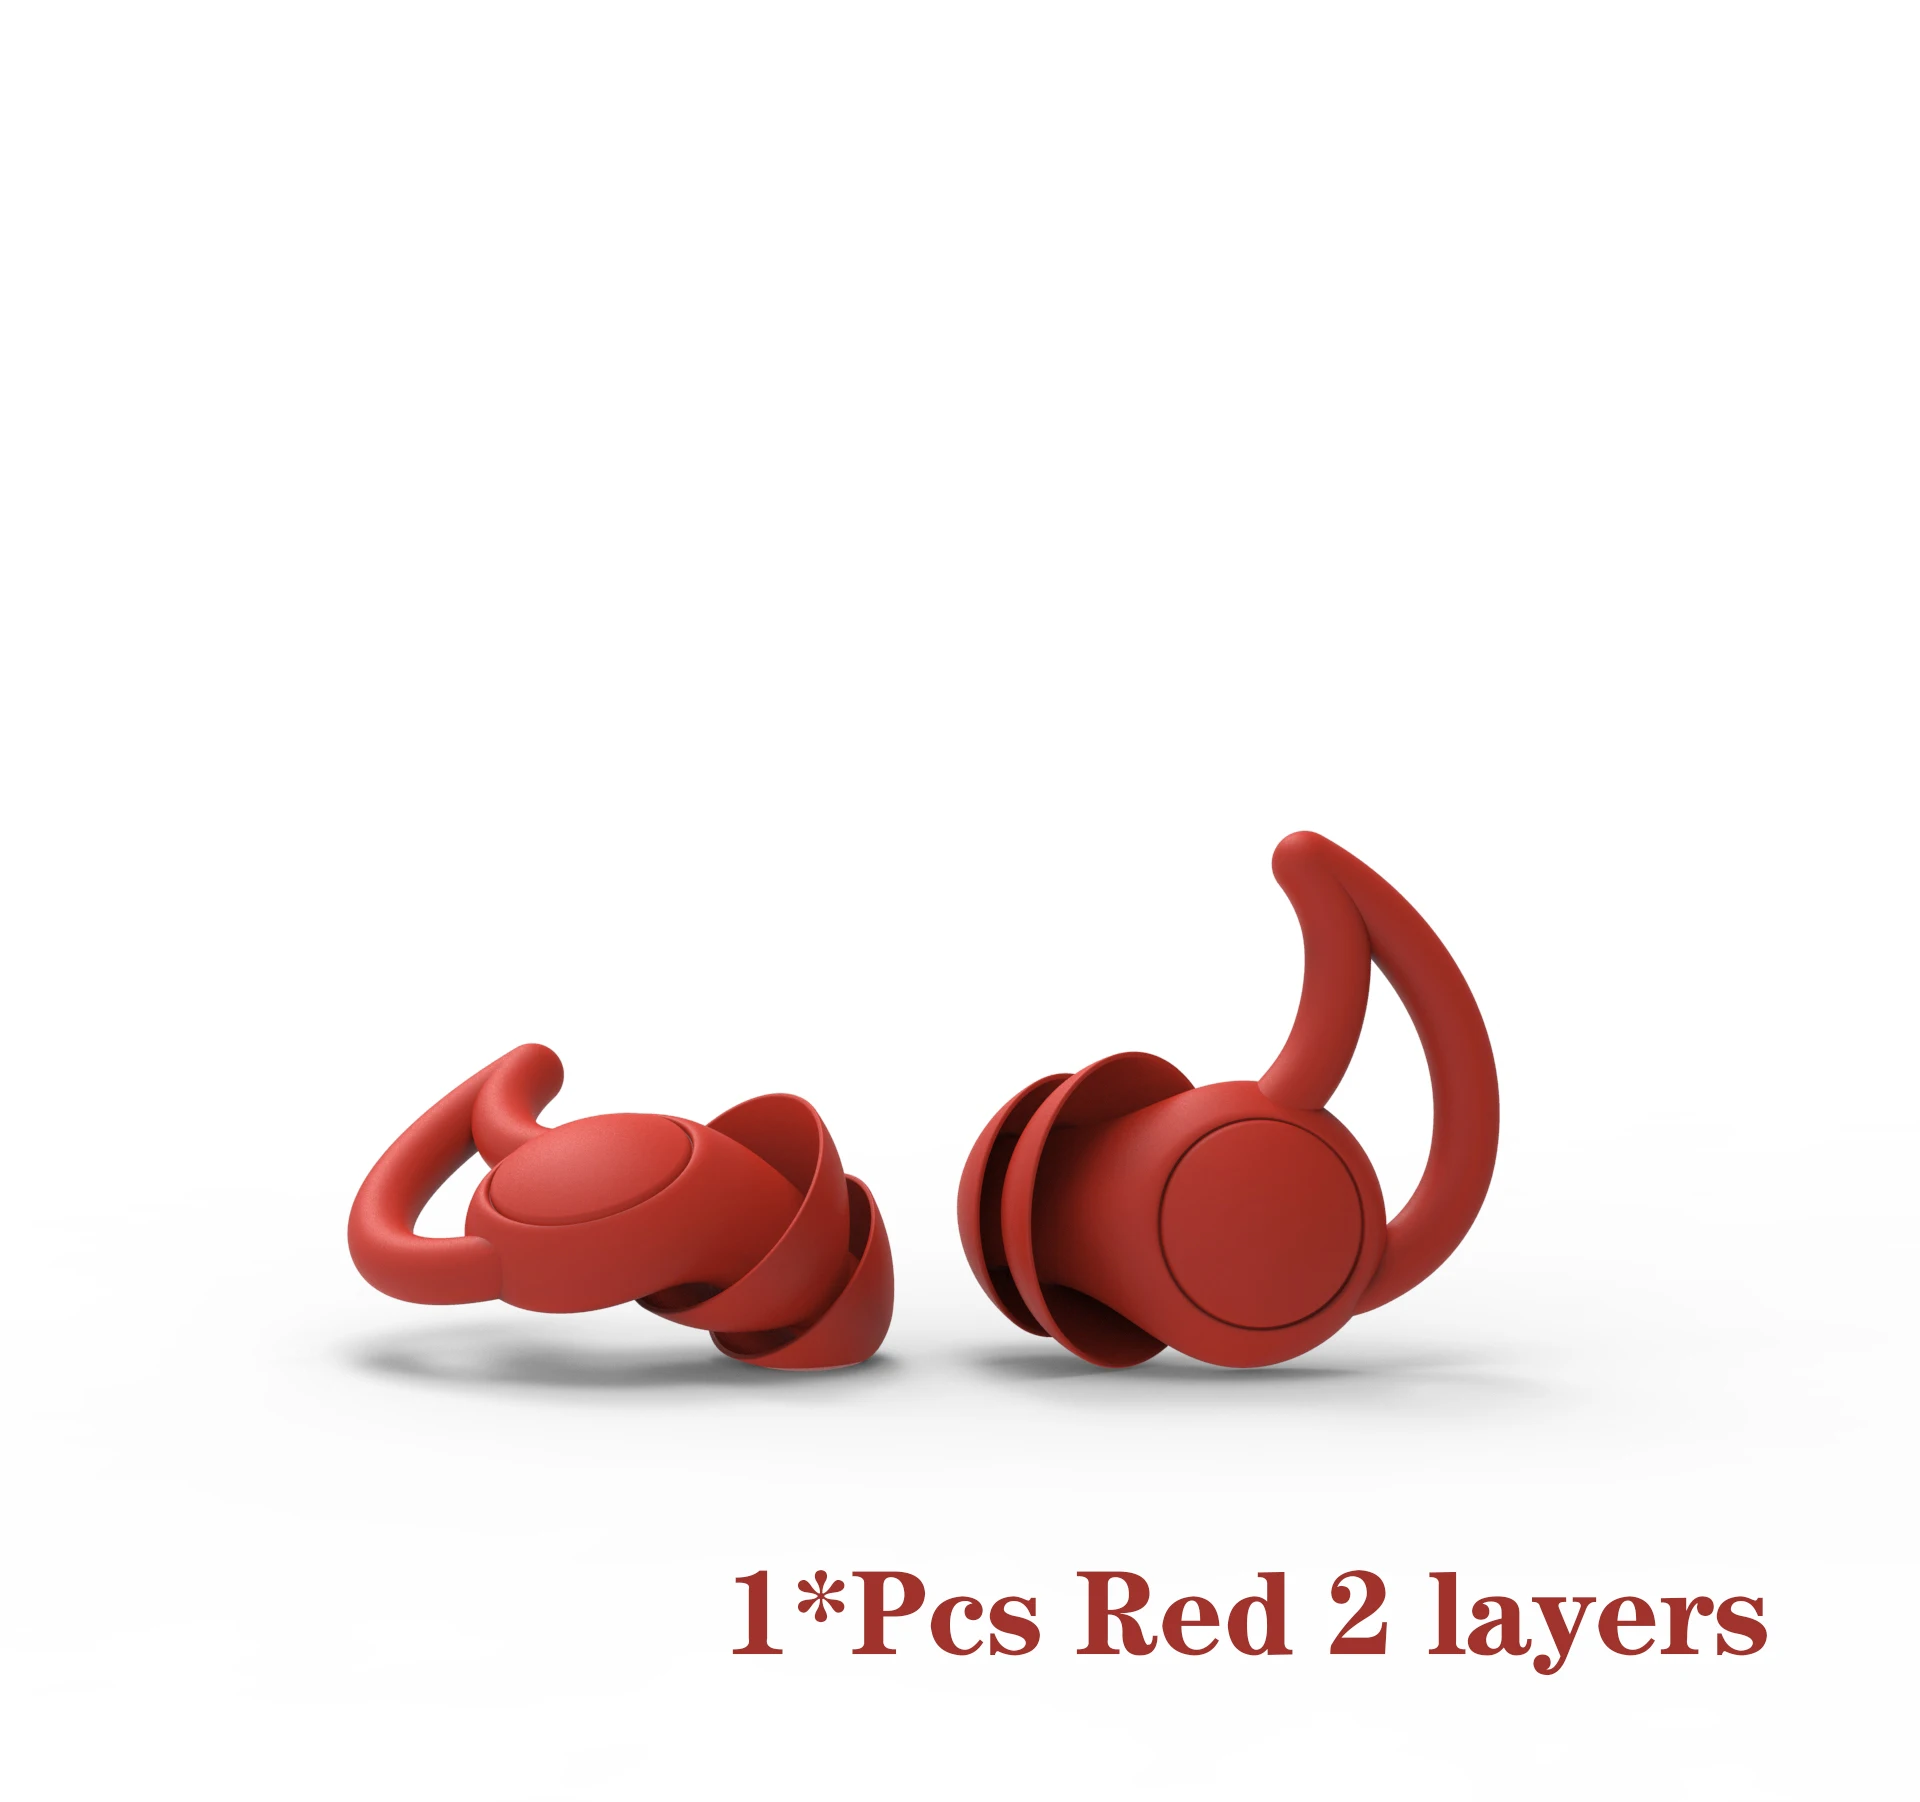 Brazil AliExpress Saver Shipping shipping VIP Dropshipping Link For Silicone Sleeping Ear Plugs